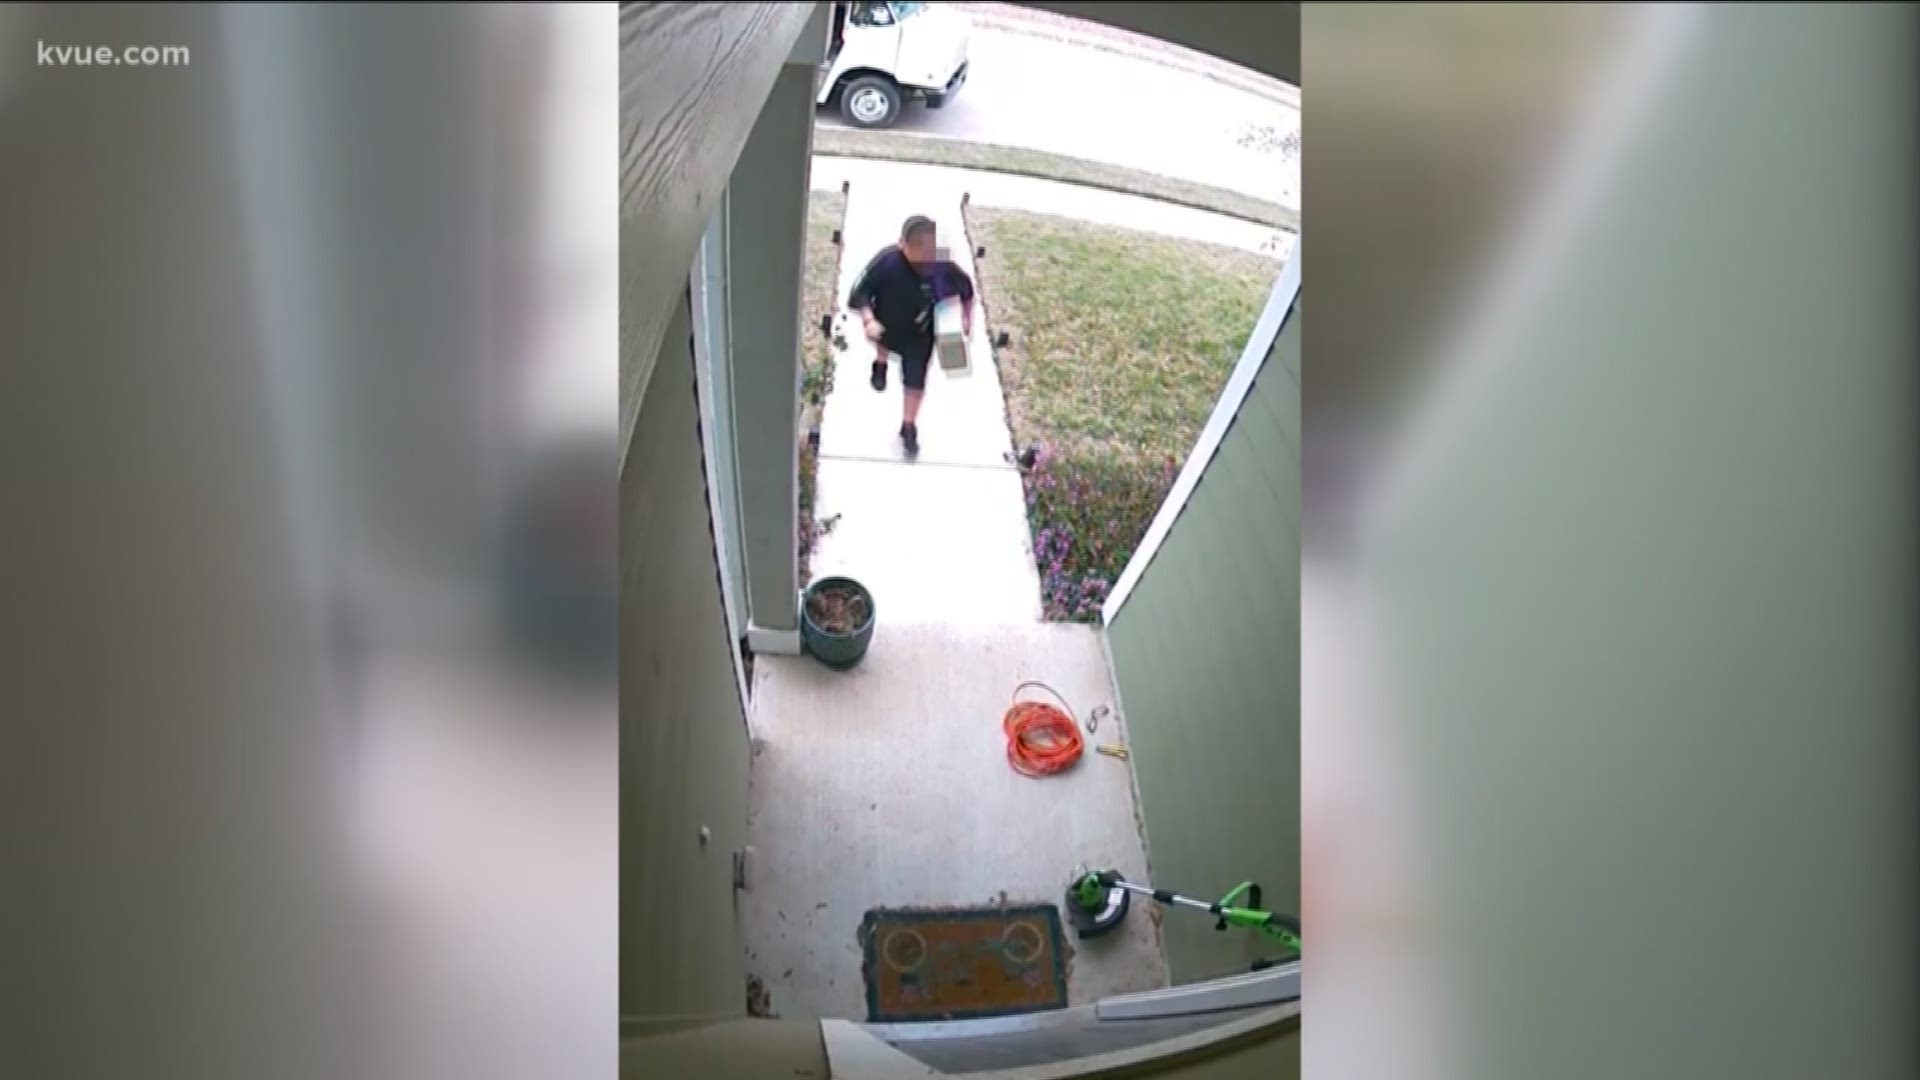 This case of package theft could all be one big coincidence – or a really well thought out scheme.